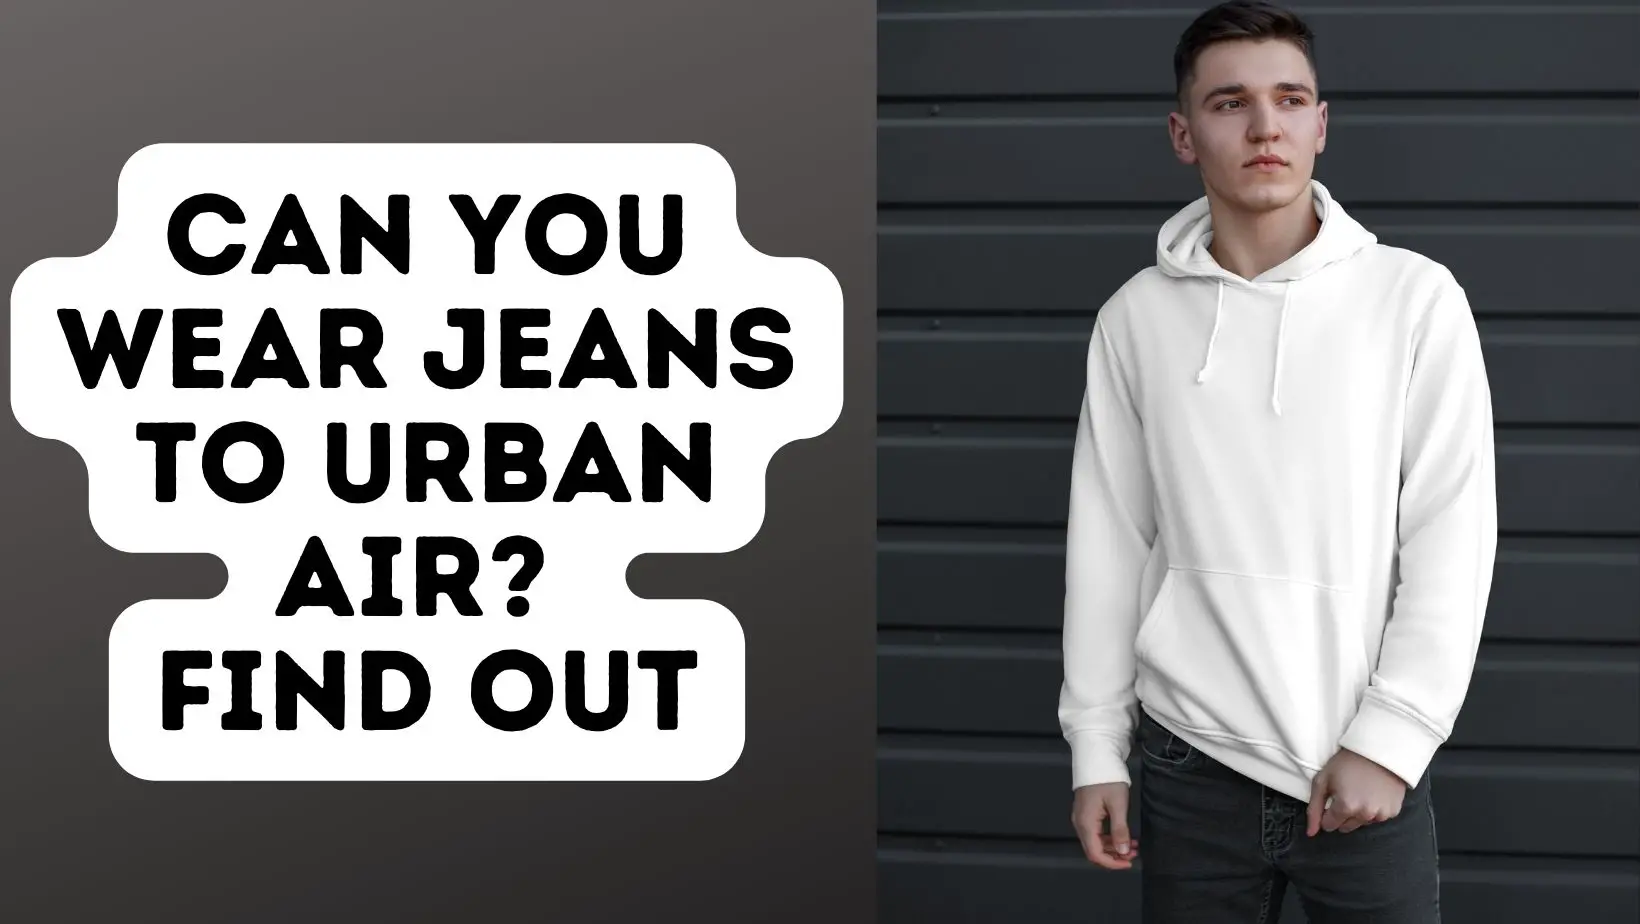 Can You Wear Jeans To Urban Air? Find Out